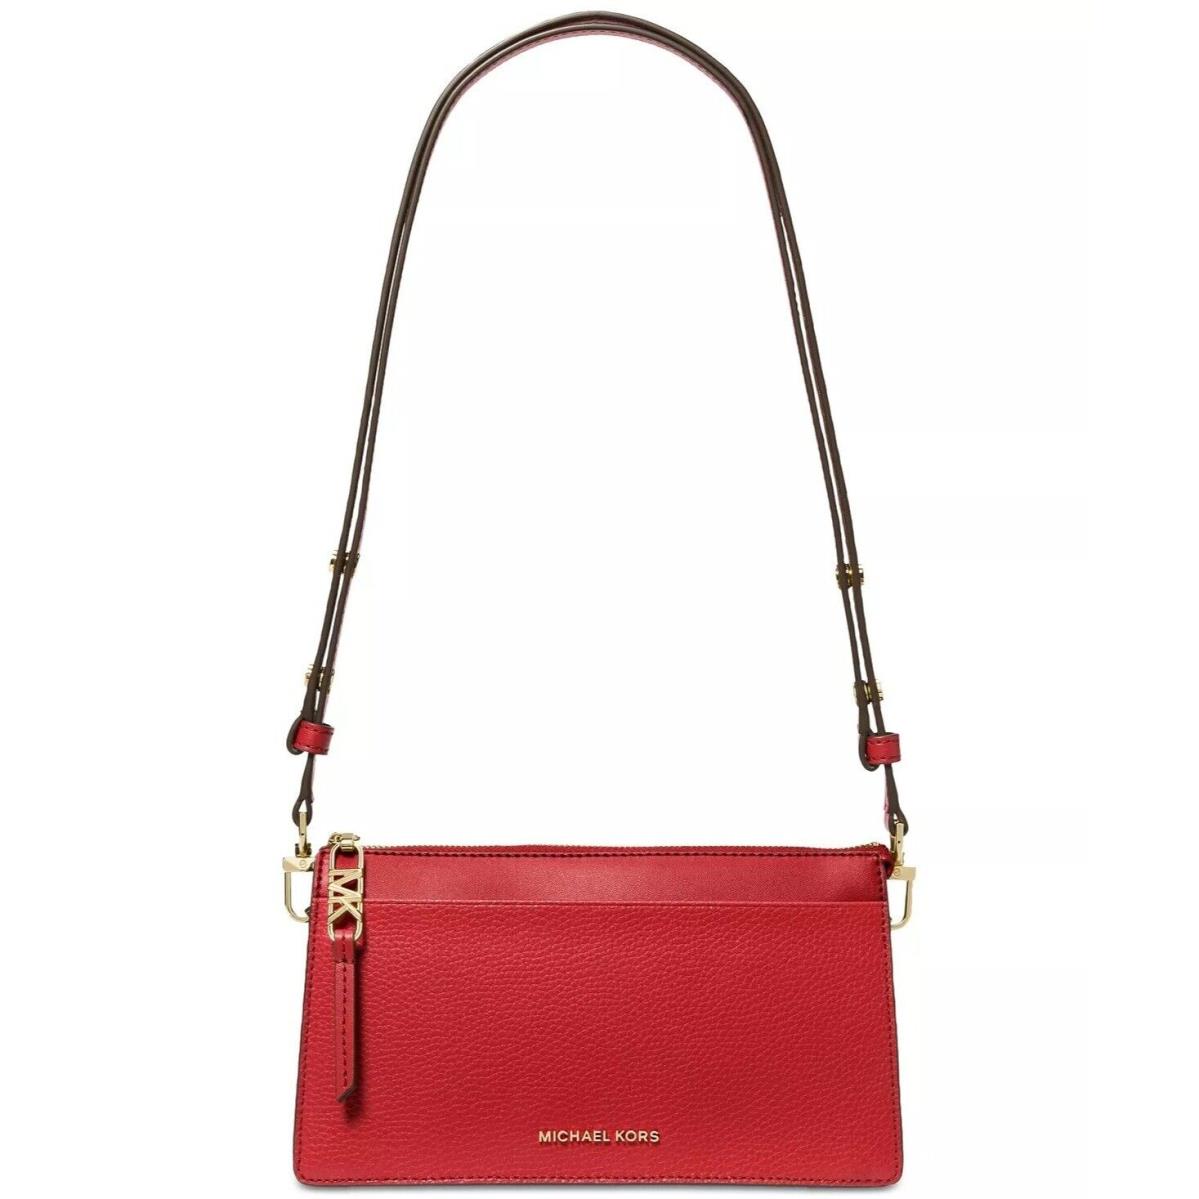 Michael Kors Women s Empire Large Leather Convertible Crossbody Red